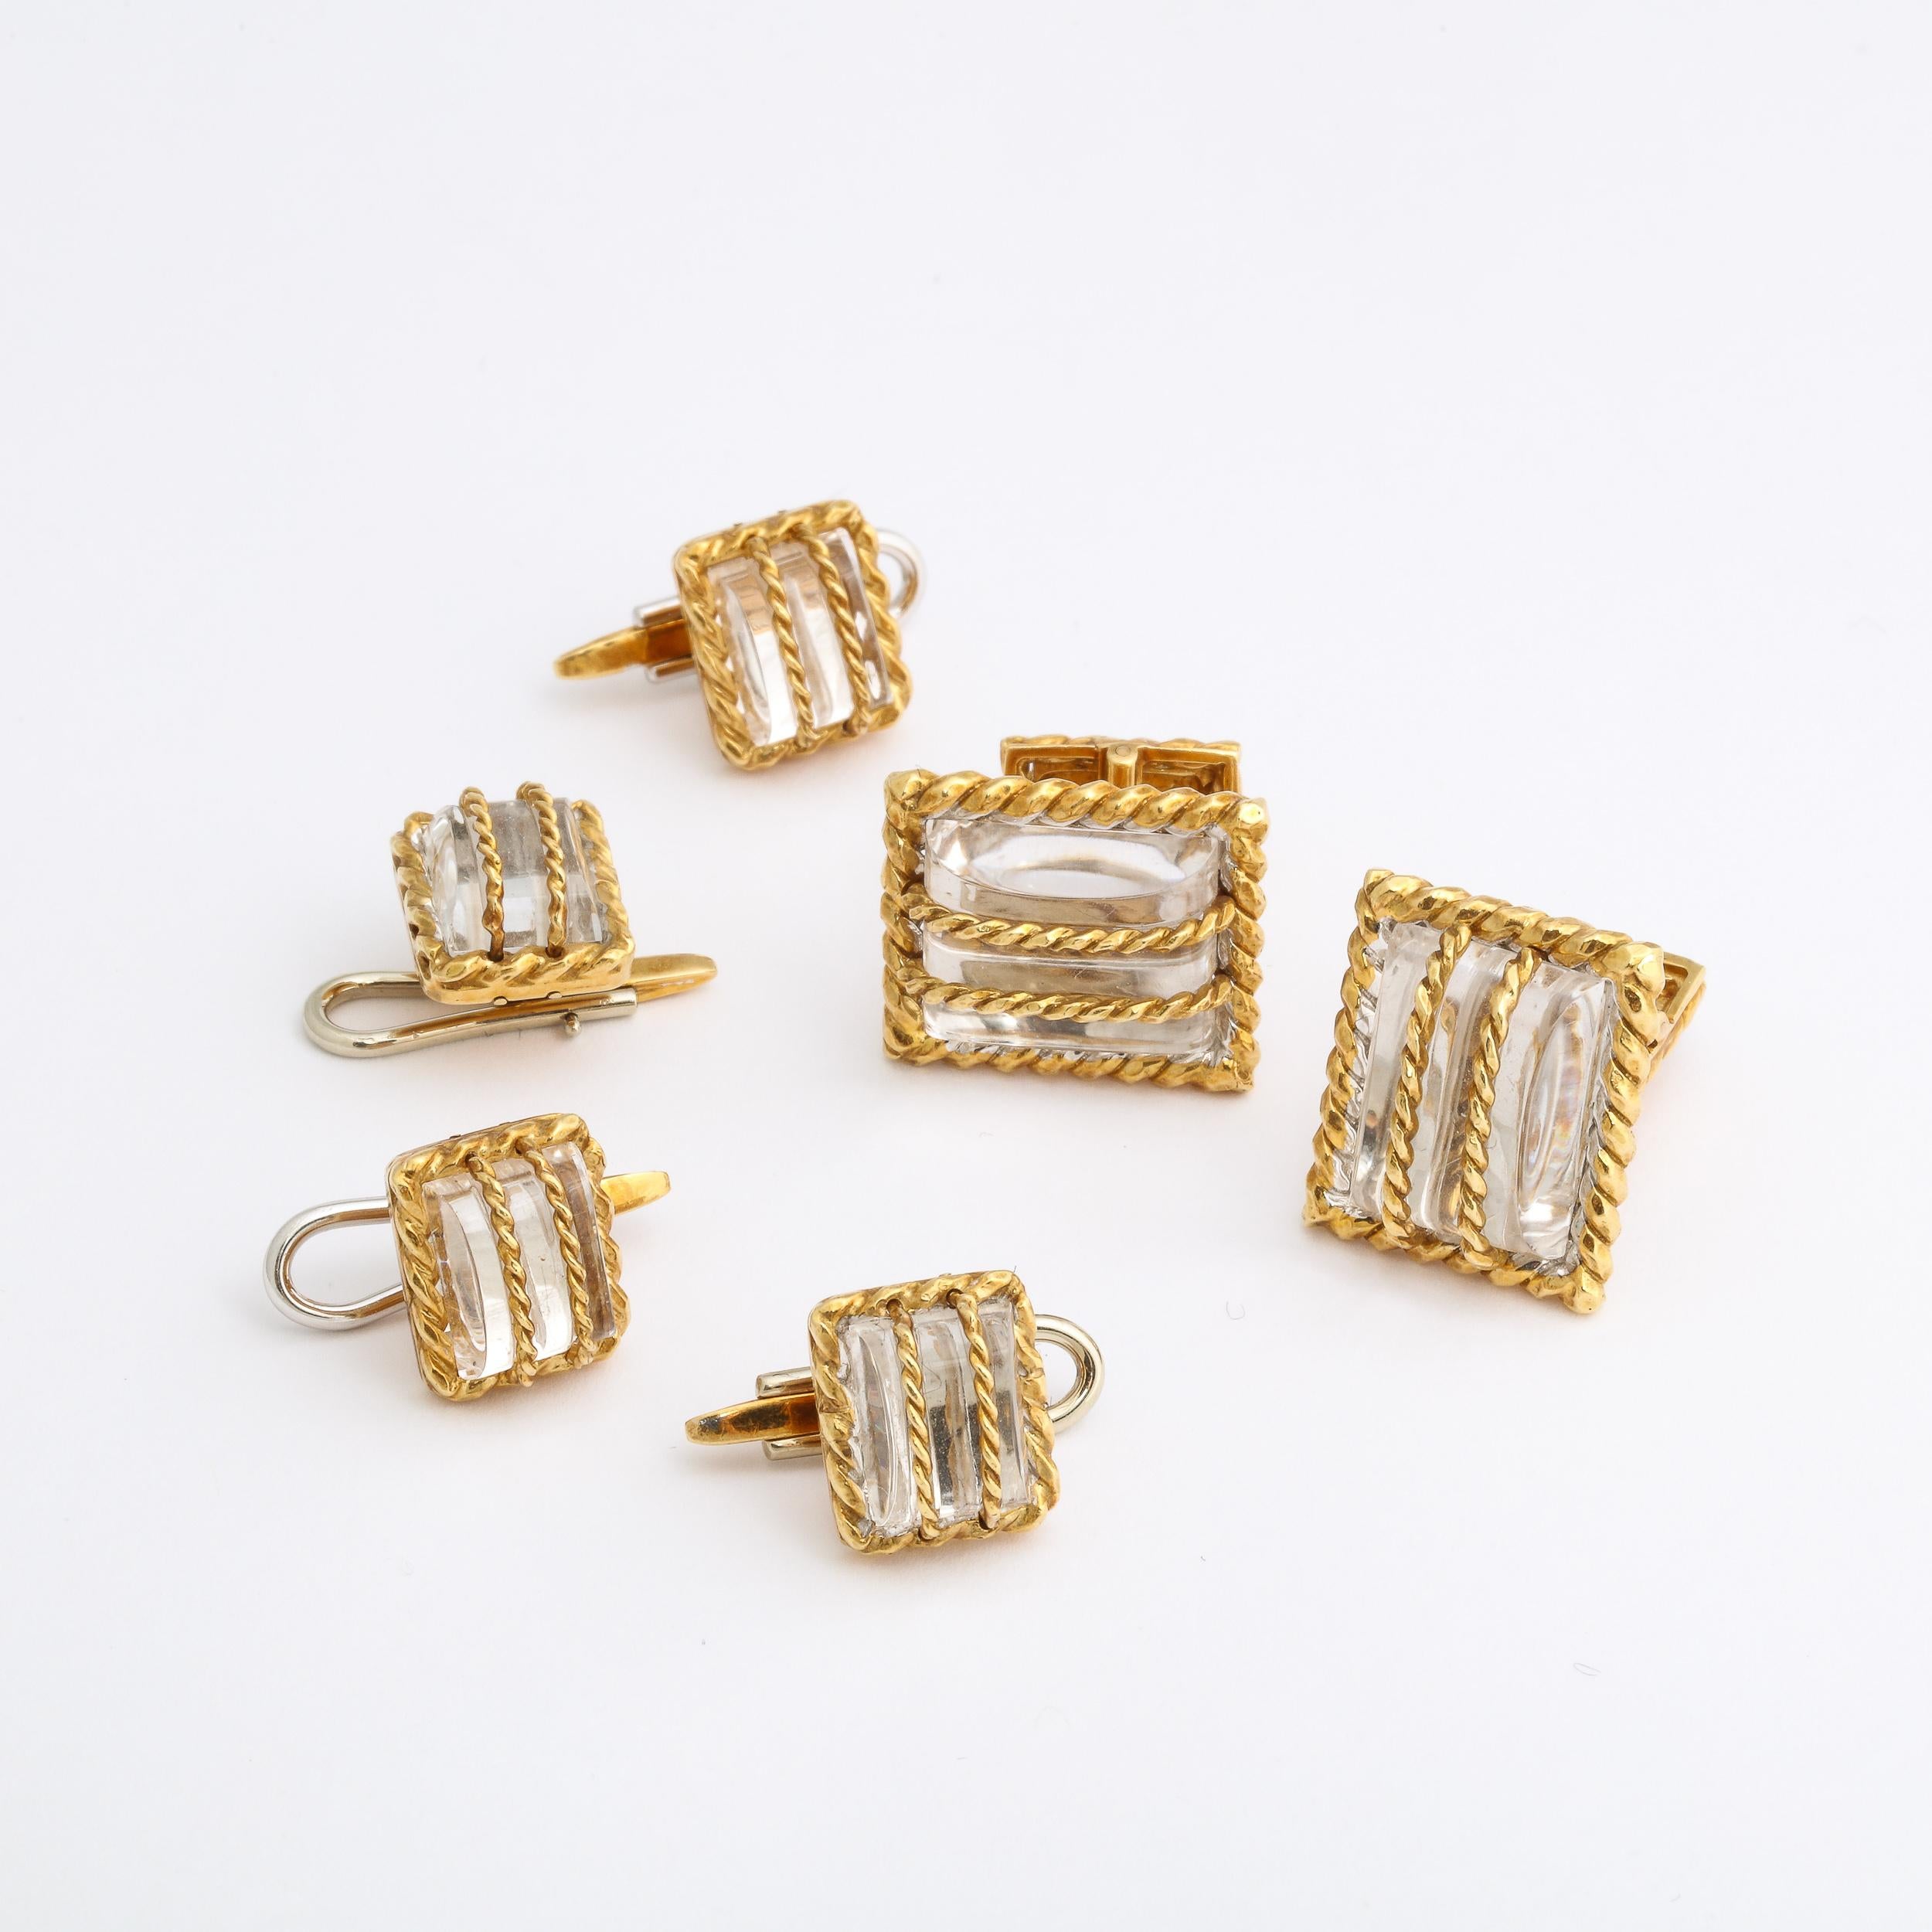 David Webb  18k Yellow Gold & Crystal  6 Piece Cufflink and Stud Set  For Sale 11